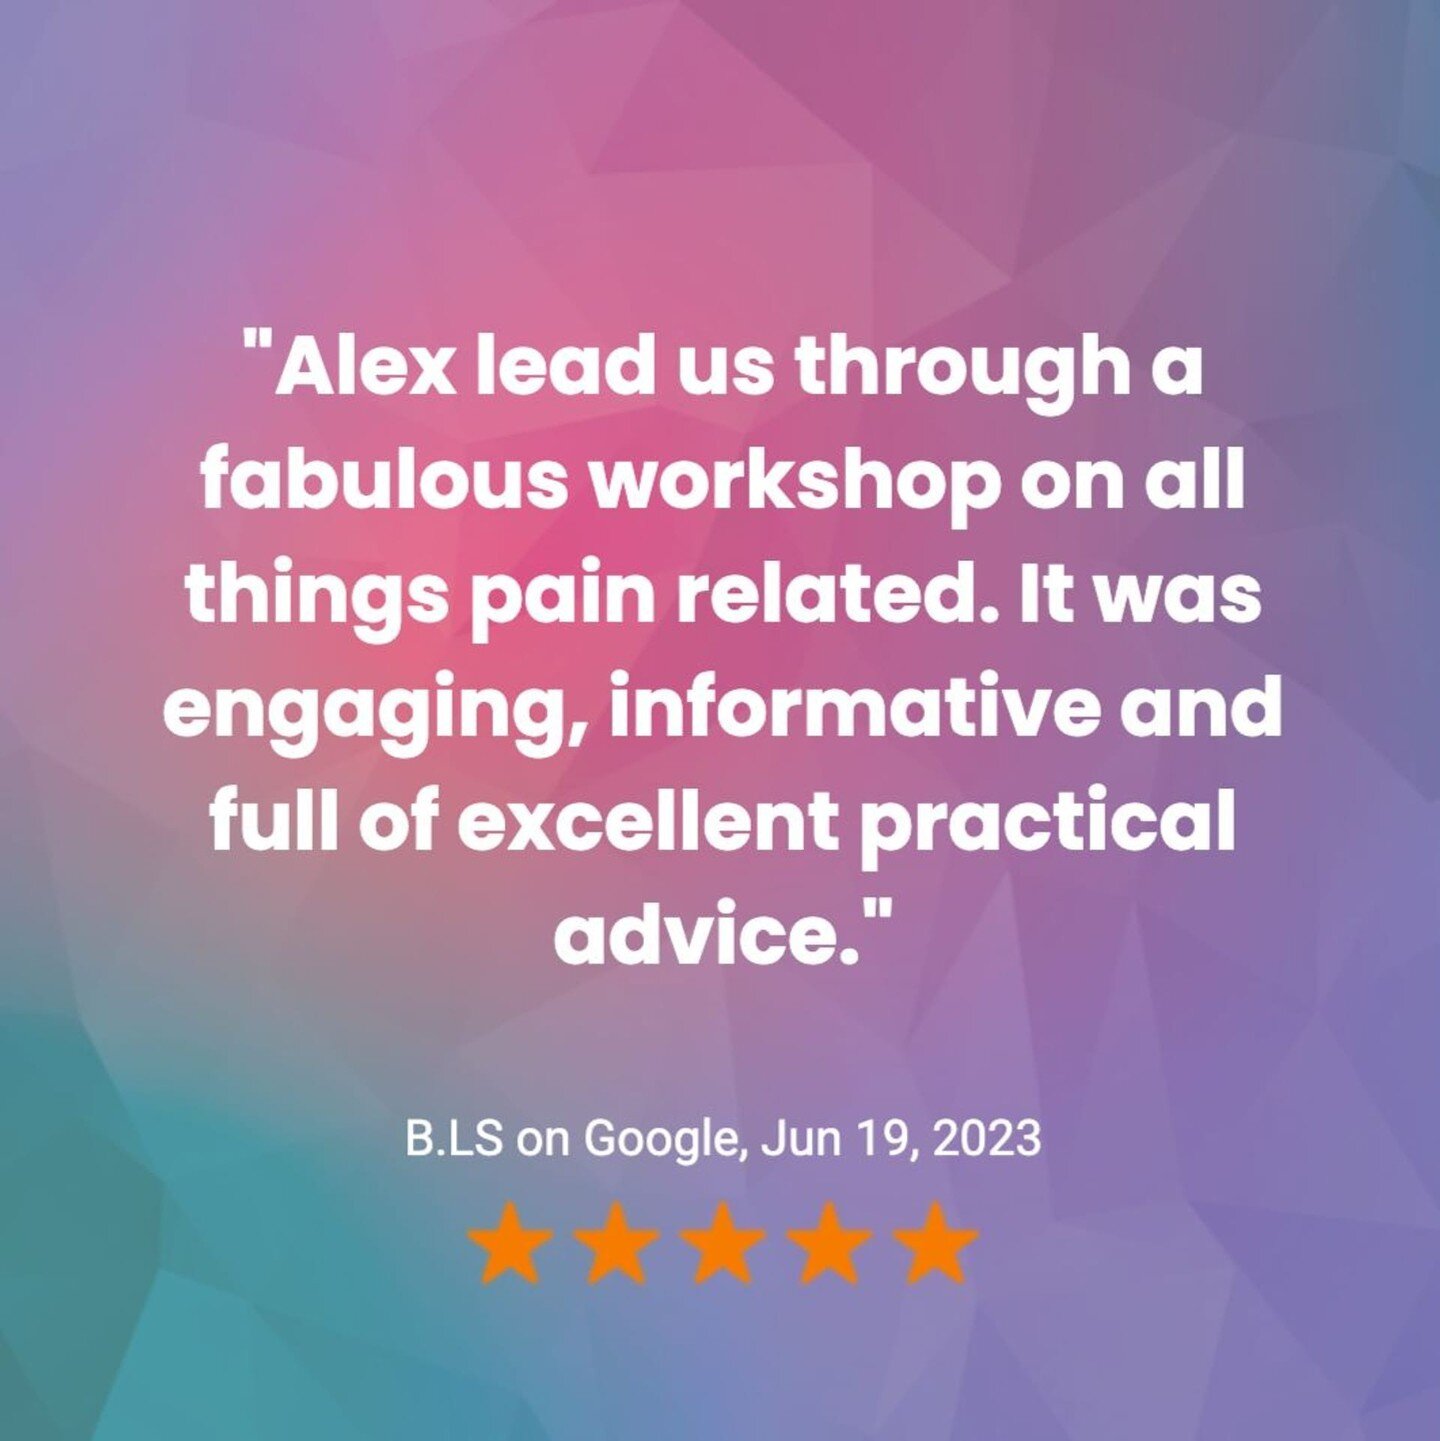 Workshop Testimonial

We love sharing resources and info with our members, as well as the wider Pilates and movement communities!

Keen for a PD workshop at your studio?

Send a DM for info on our Education offerings

#pilatesteacher #pilatesinstruct